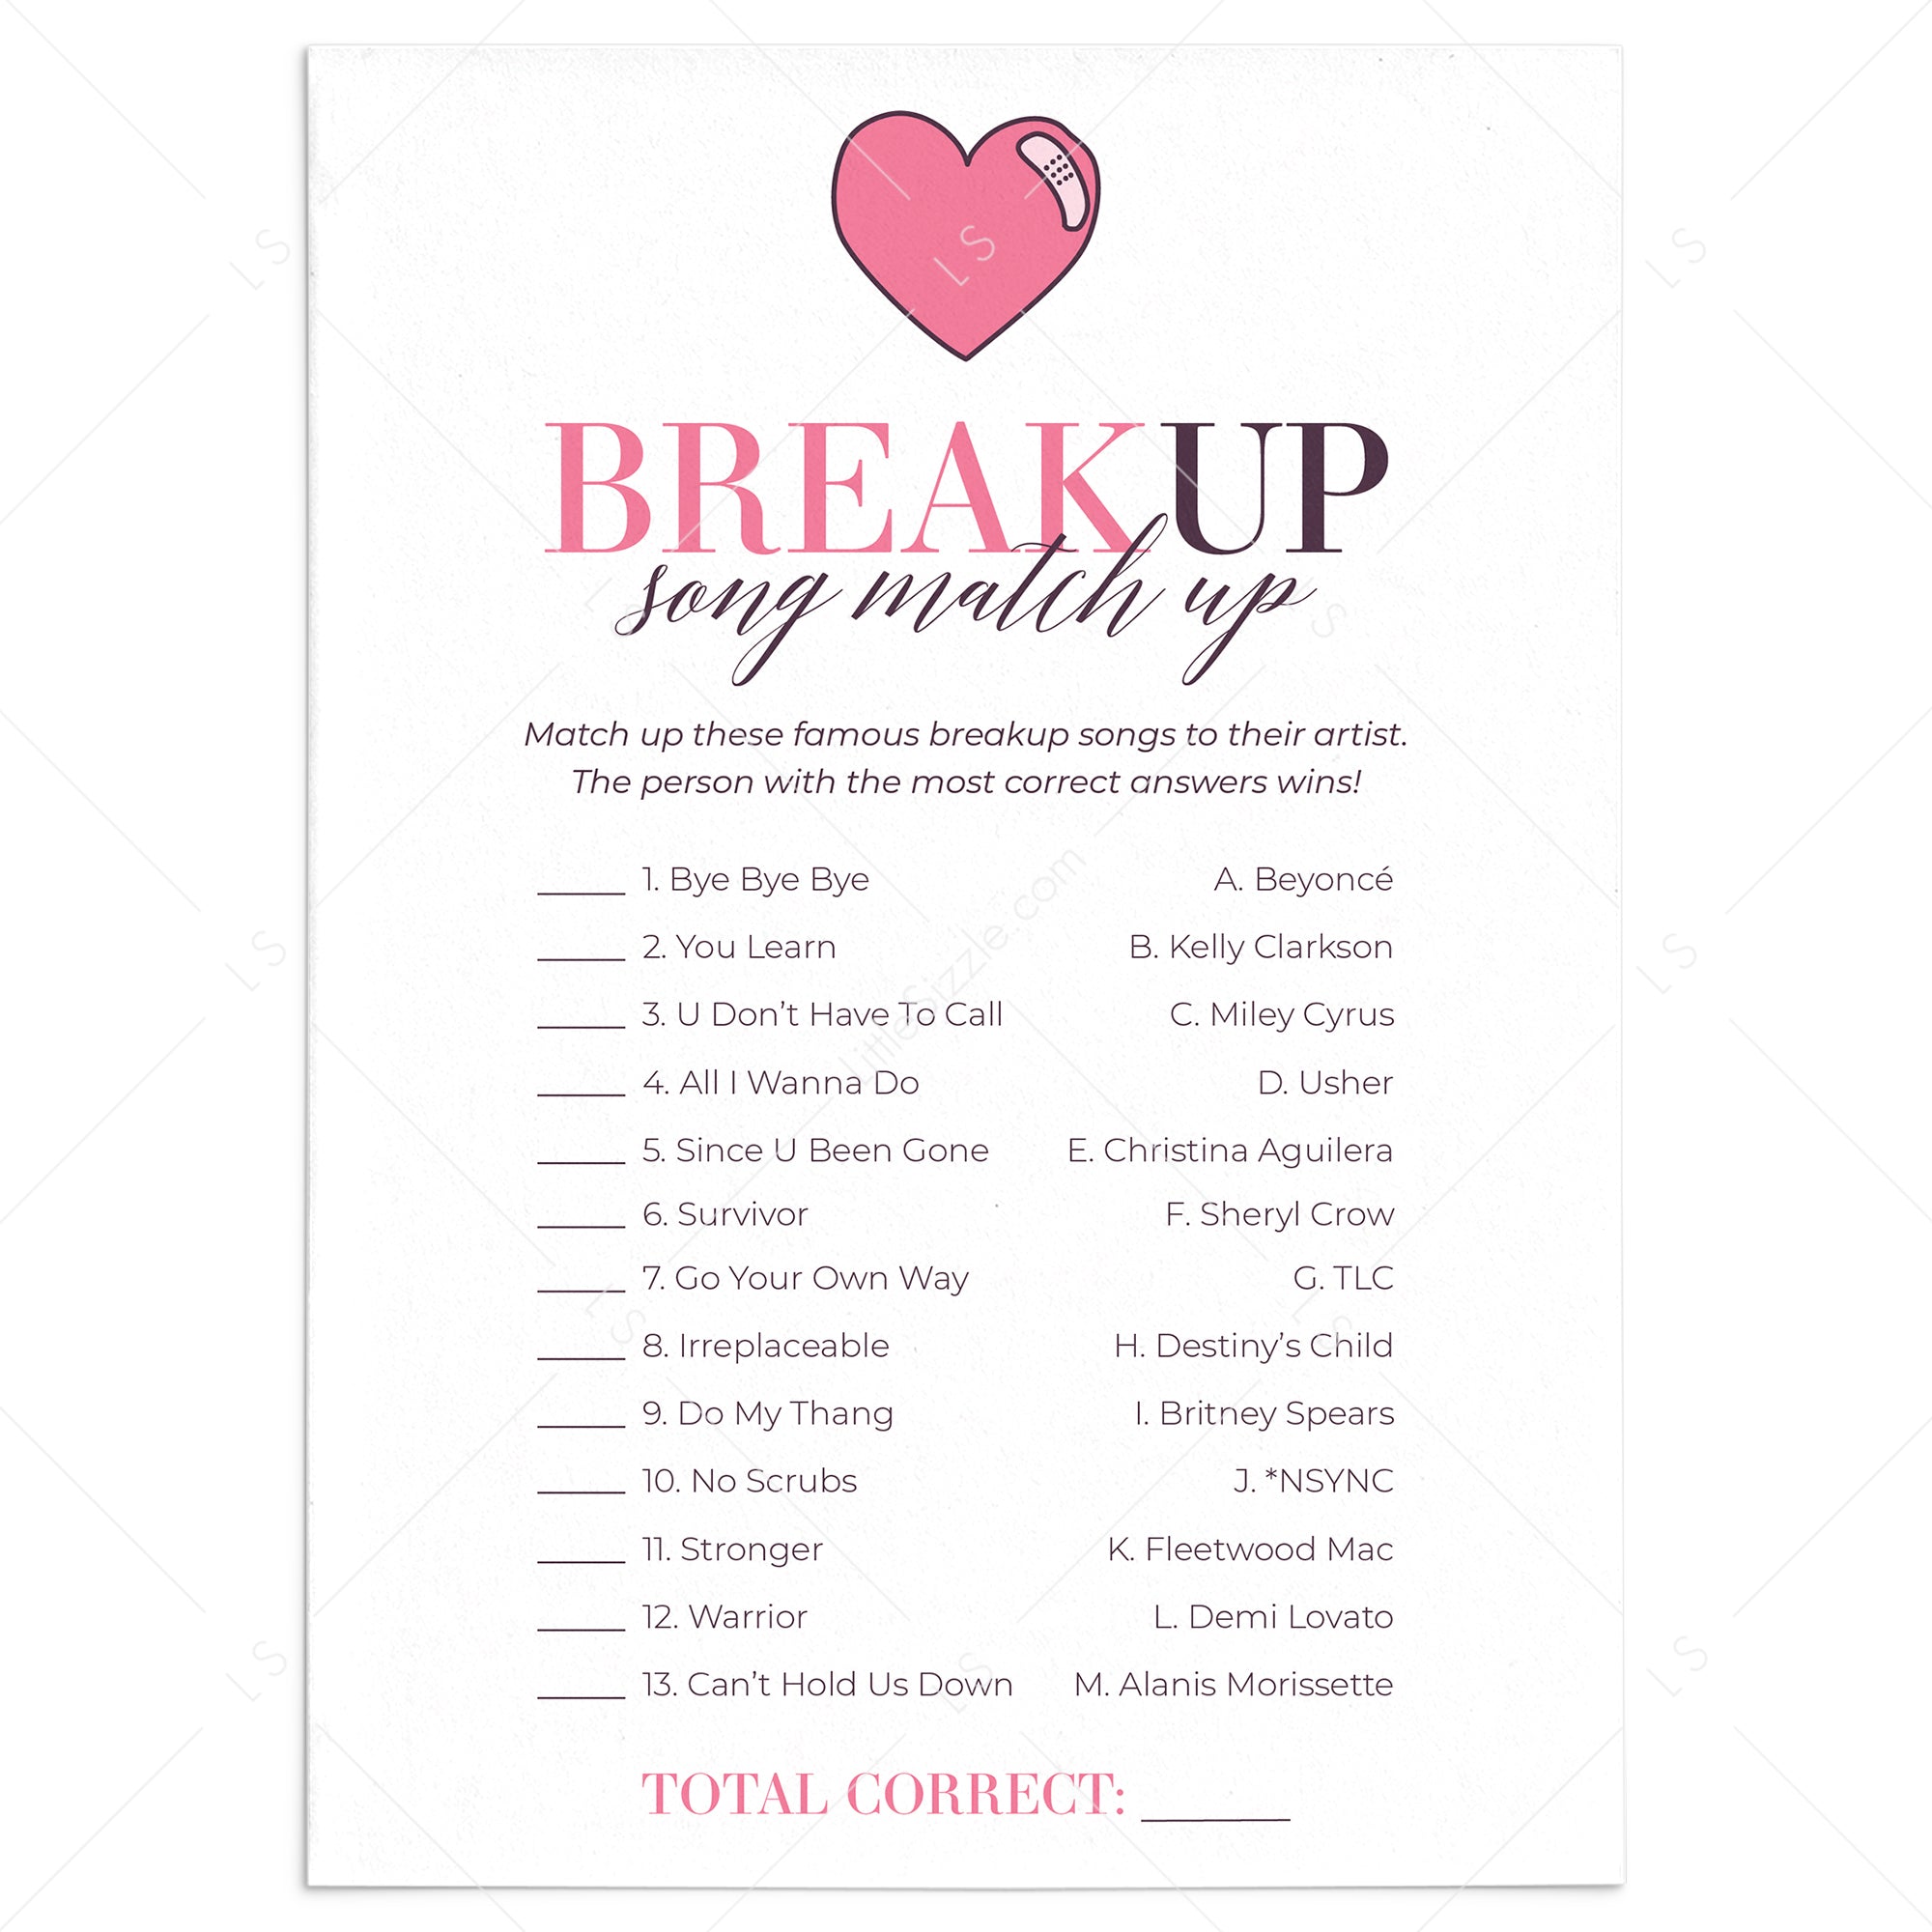 Breakup Songs Match Up with Answer Key Printable | Breakup Party Ideas